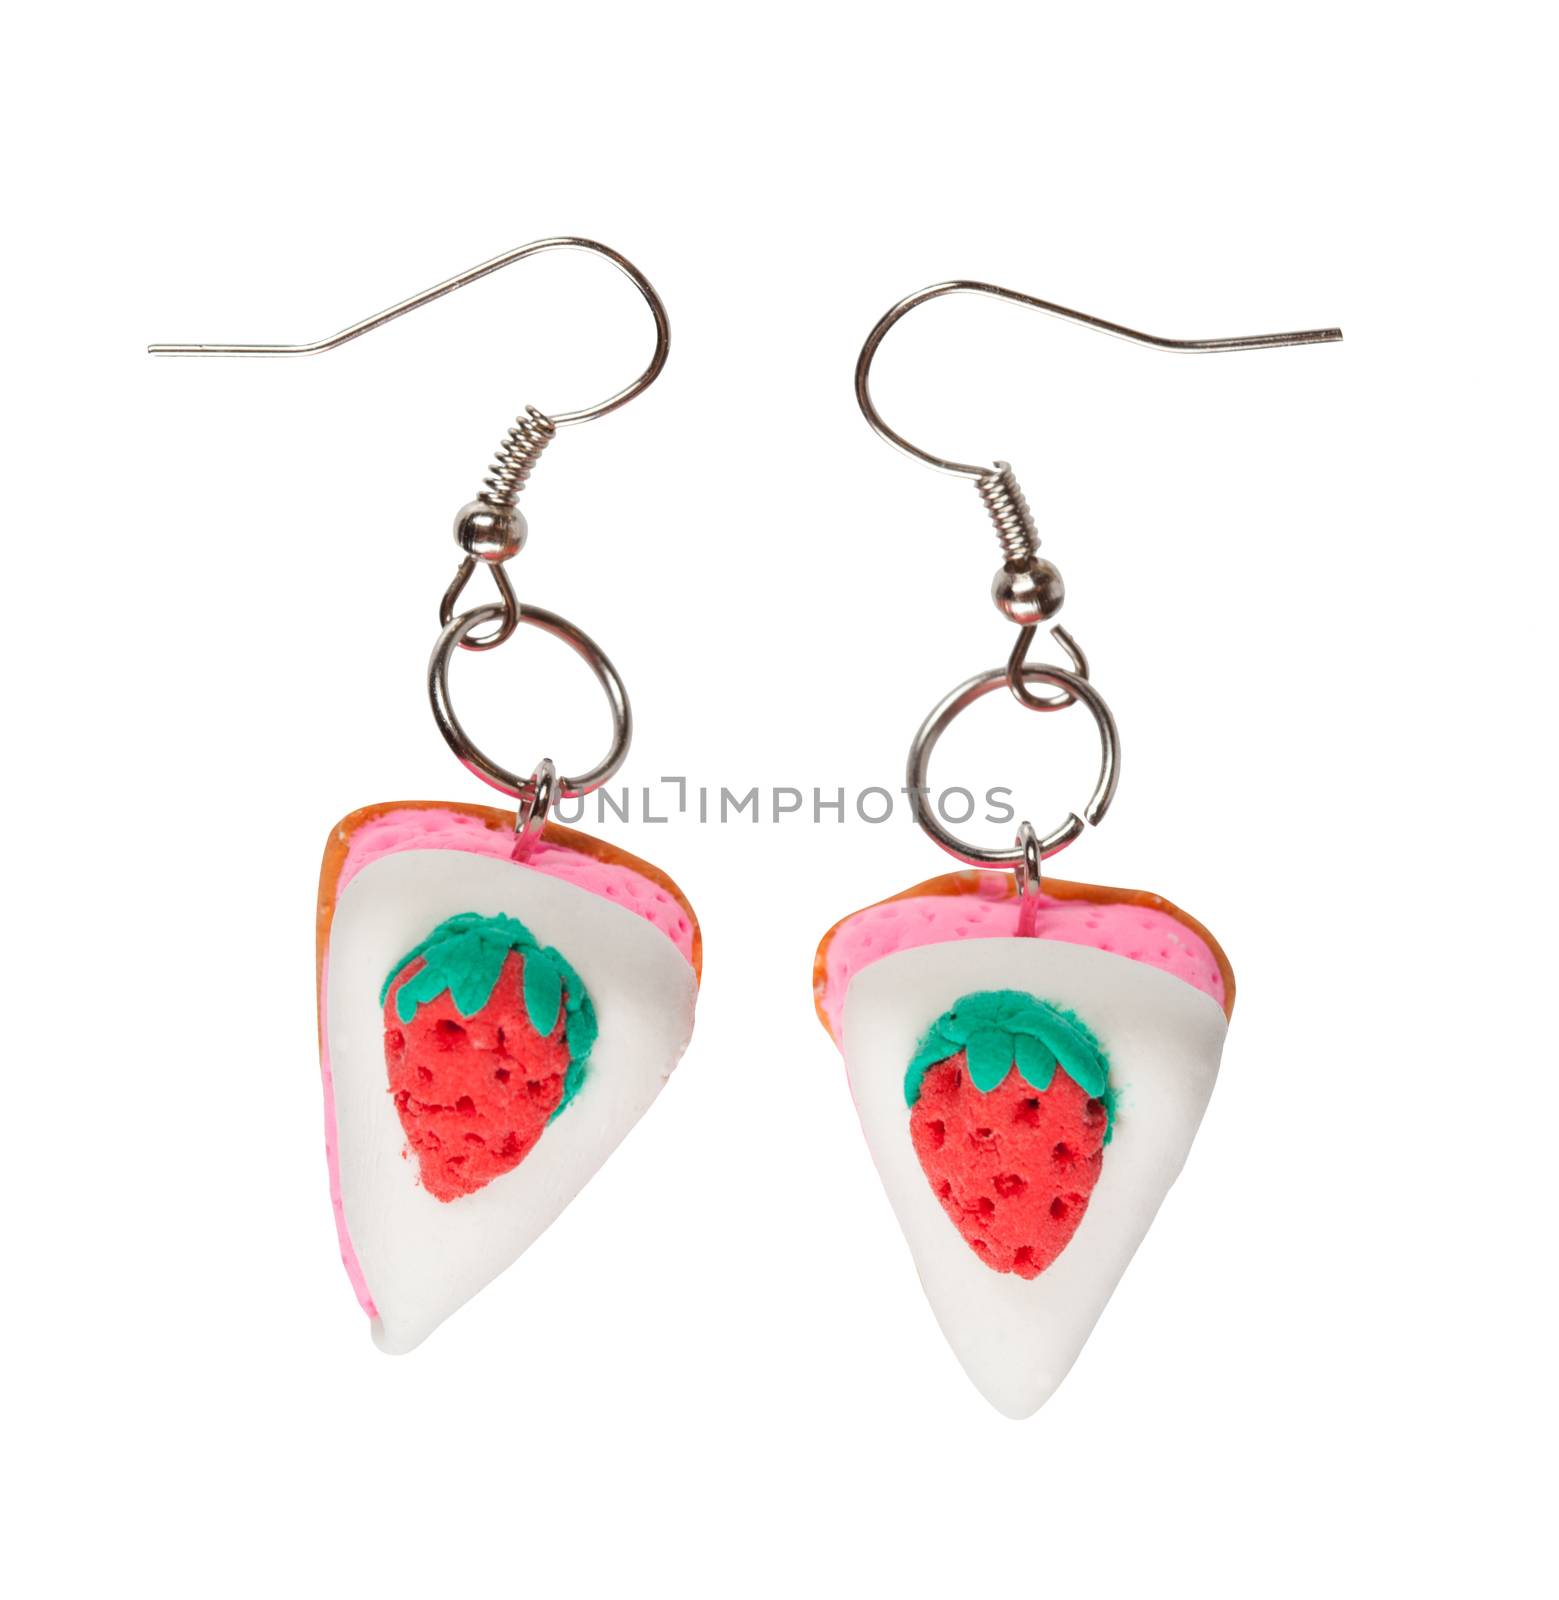 Earrings made of plastic in the form of the cake with strawberry. Isolated on white background.